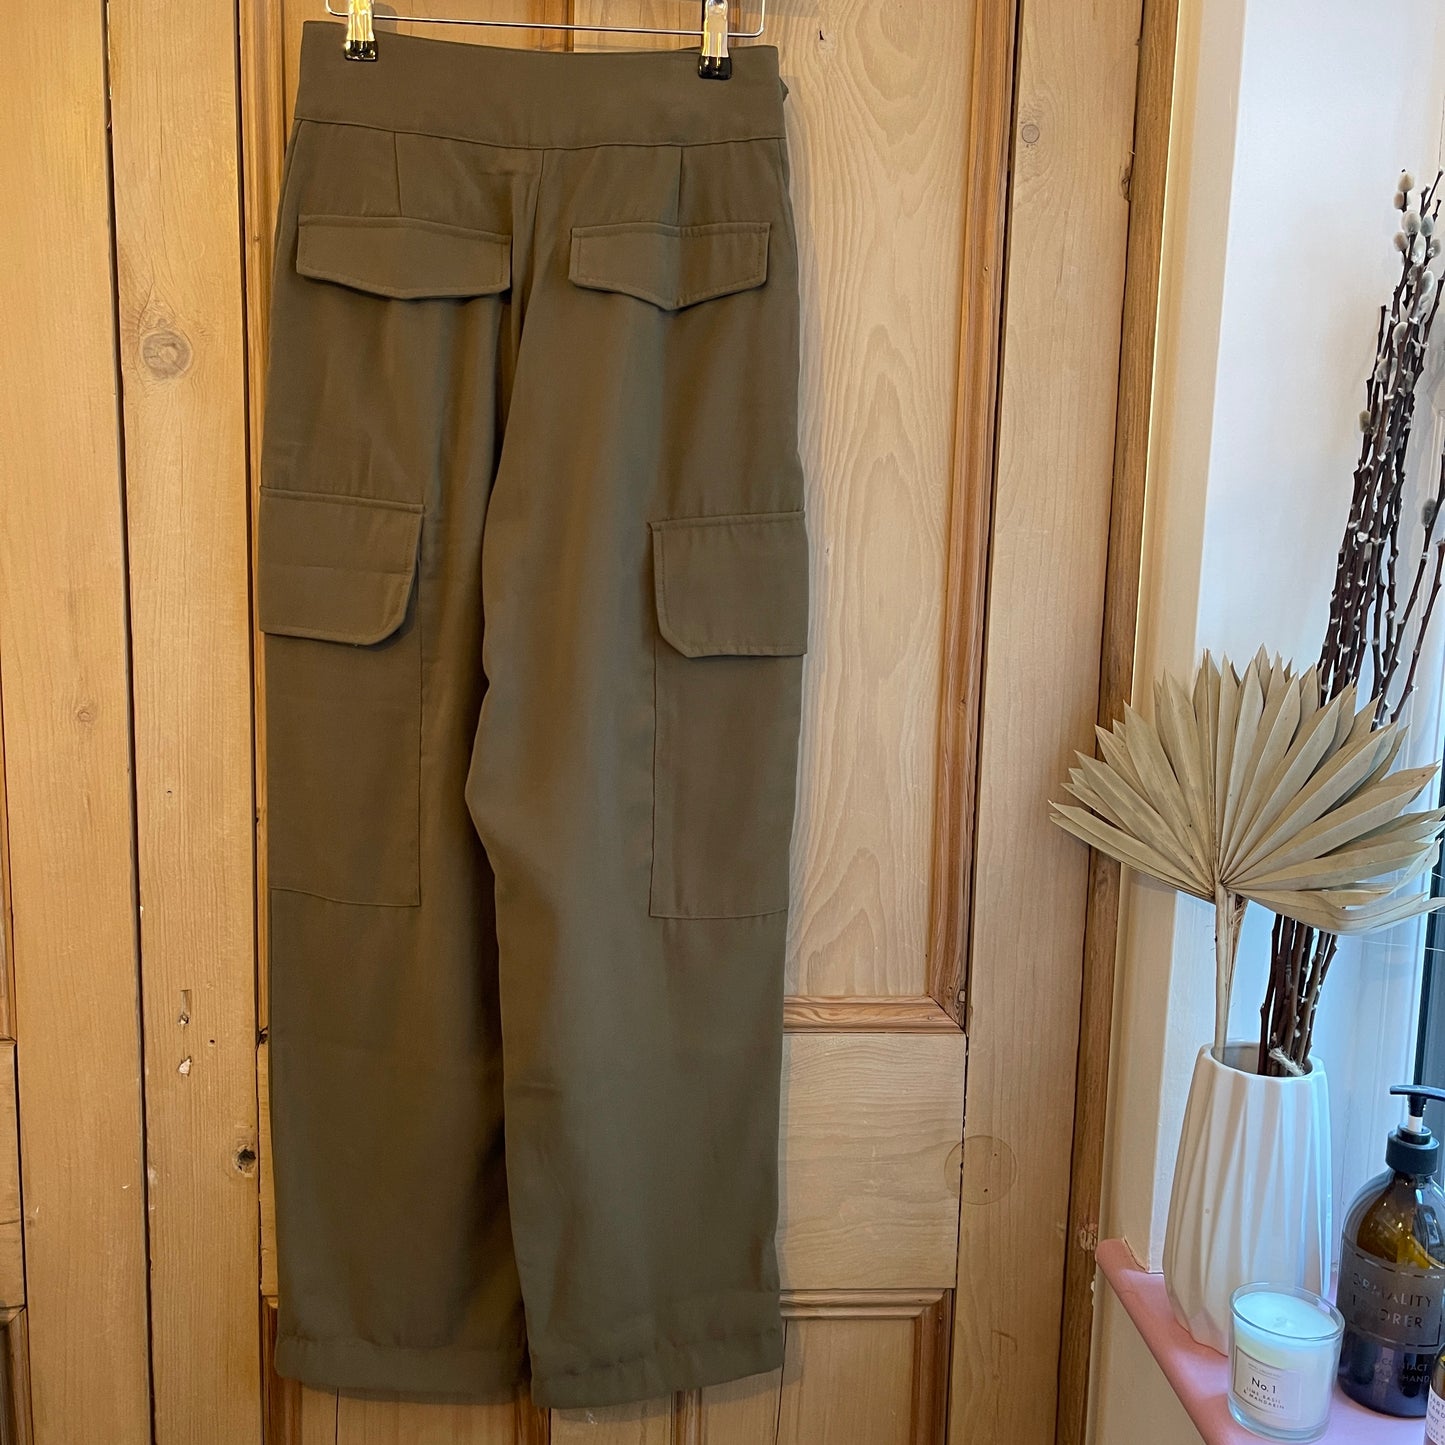 Mango Cargo Style Trousers Green Size Small